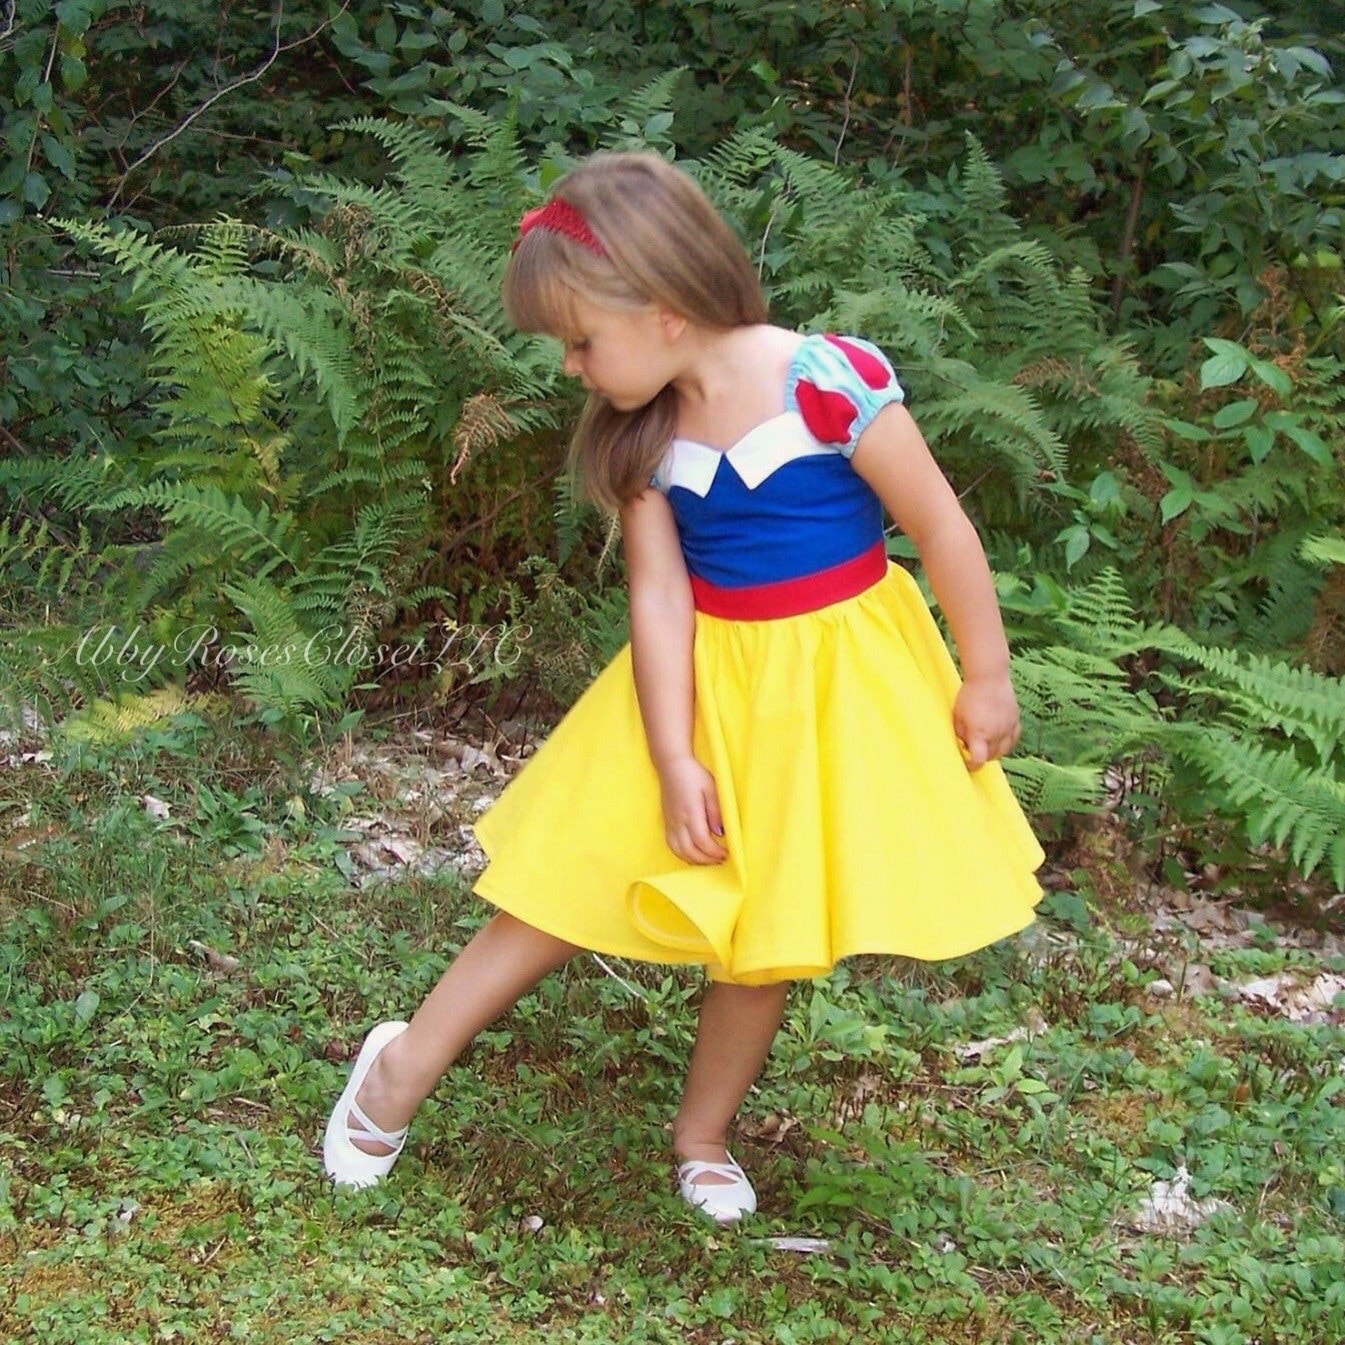 Snow White-inspired Comfy T-shirt Dress for Women, Sizes S, M, L, XL and  XXL 